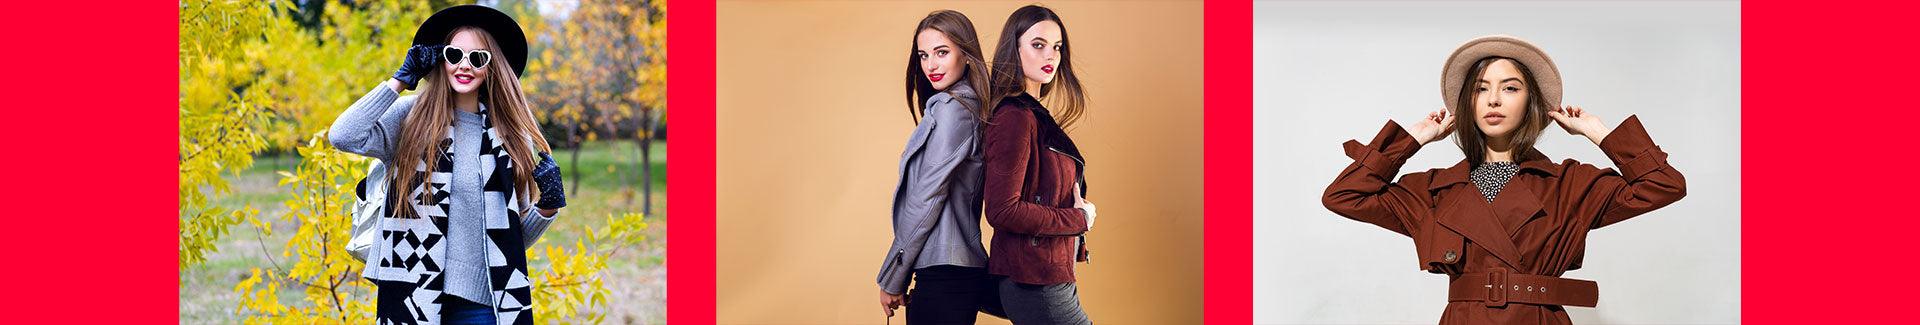 Explore a Wide Range of Women's Outerwear Online - Daily Fashion